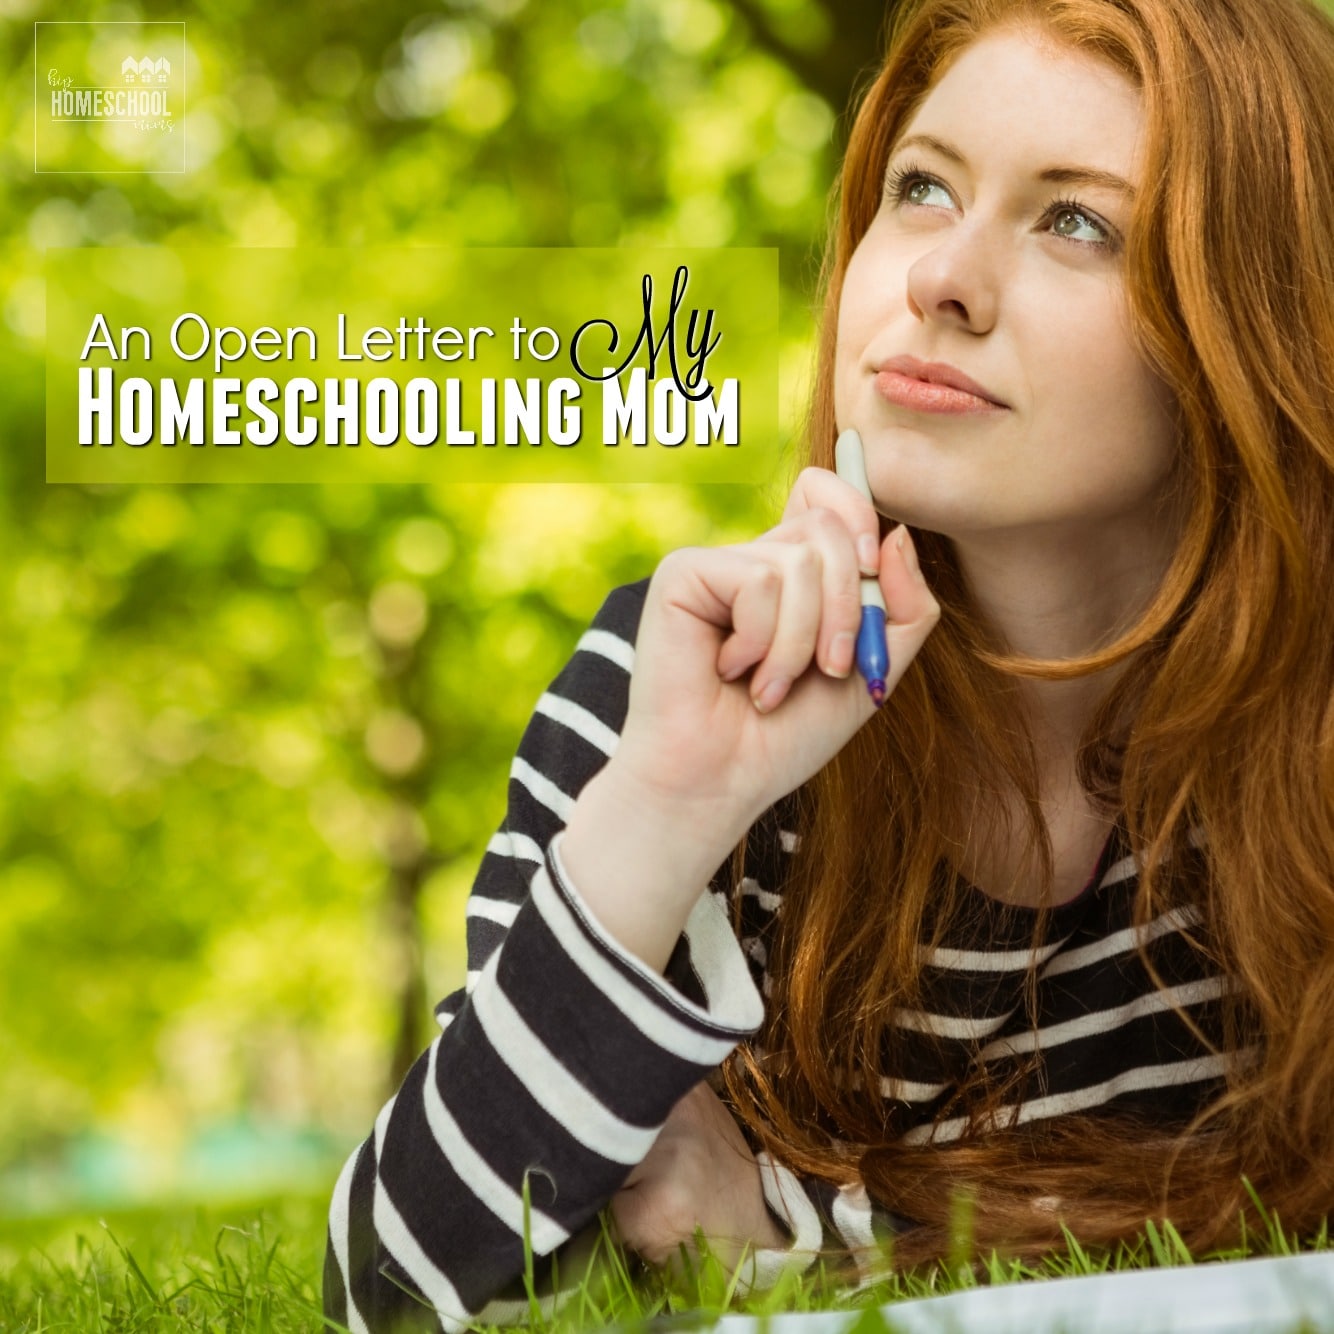 An Open Letter to My Homeschooling Mom